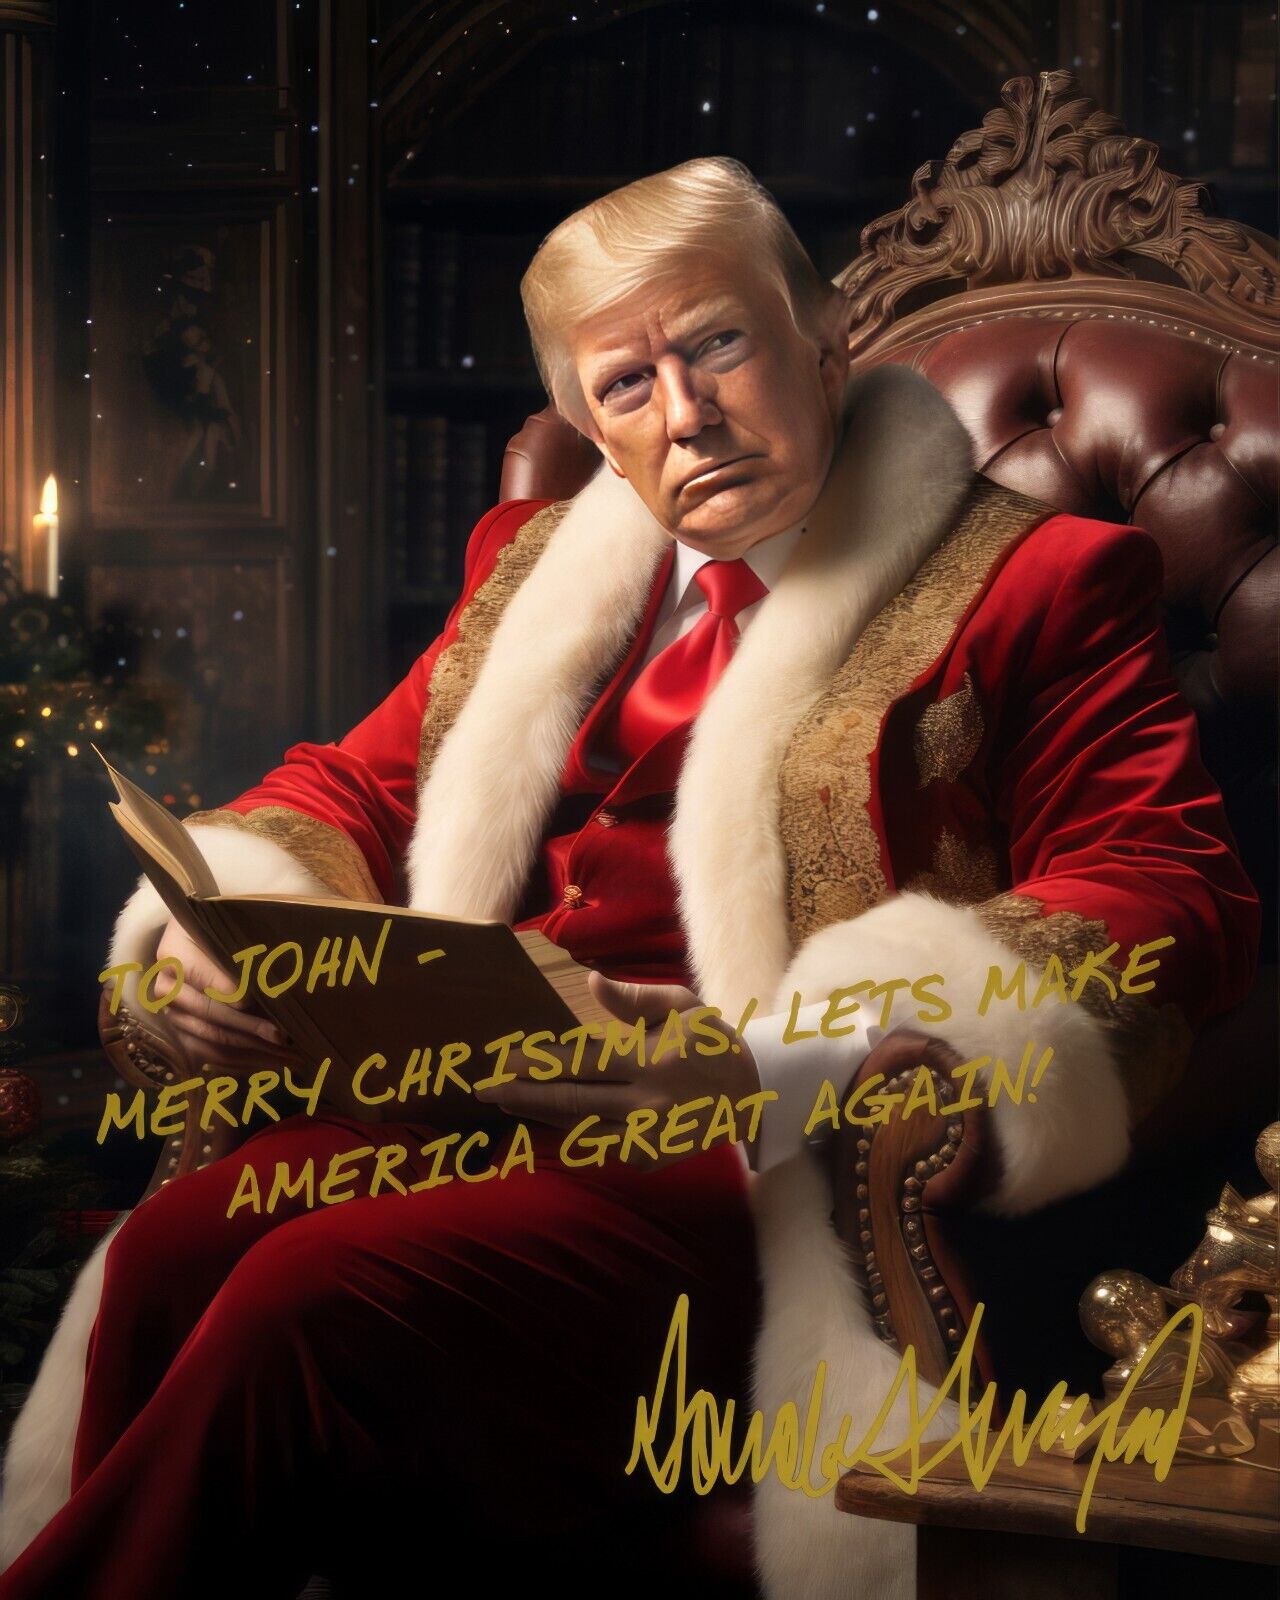 PRESIDENT DONALD TRUMP MERRY CHRISTMAS PERSONALIZED MESSAGE 8X10 AI PHOTO